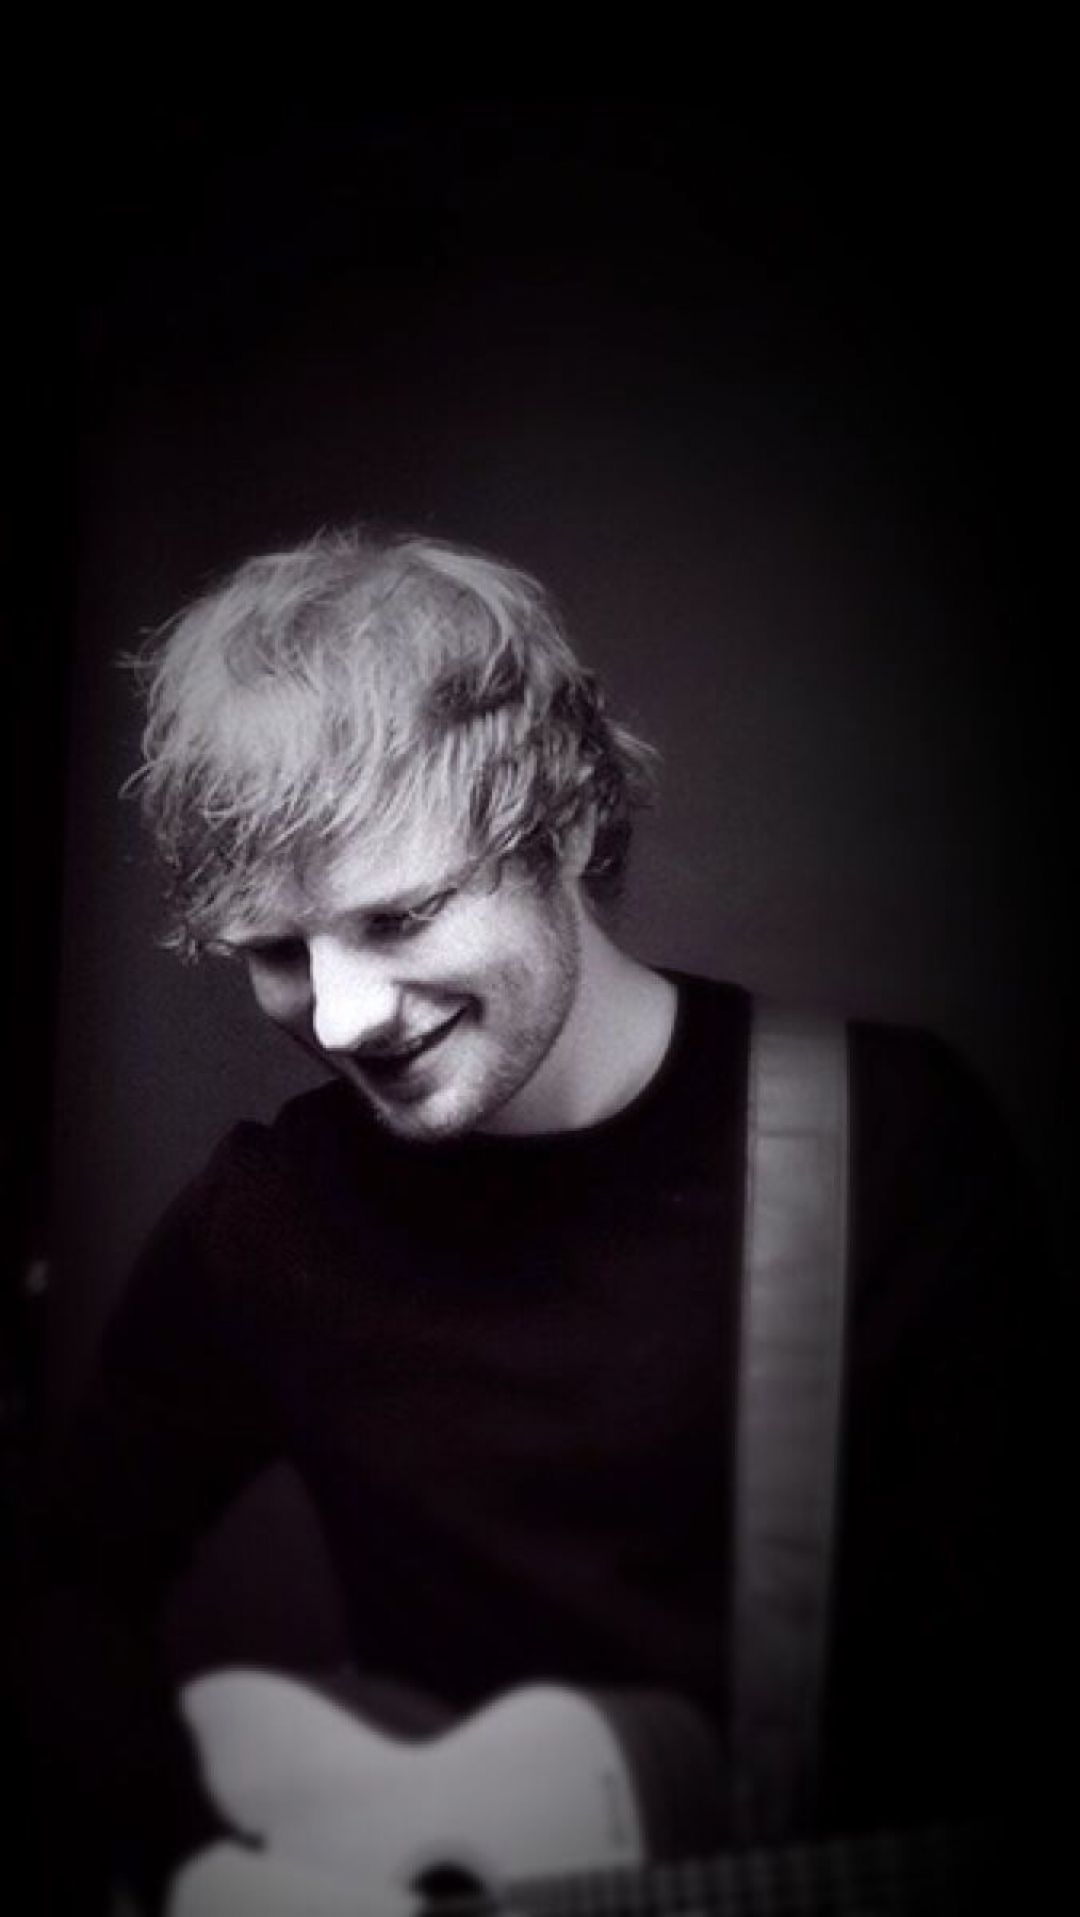 Android, Iphone, Desktop Hd Backgrounds / Wallpapers - Ed Sheeran Wallpaper Phone - HD Wallpaper 